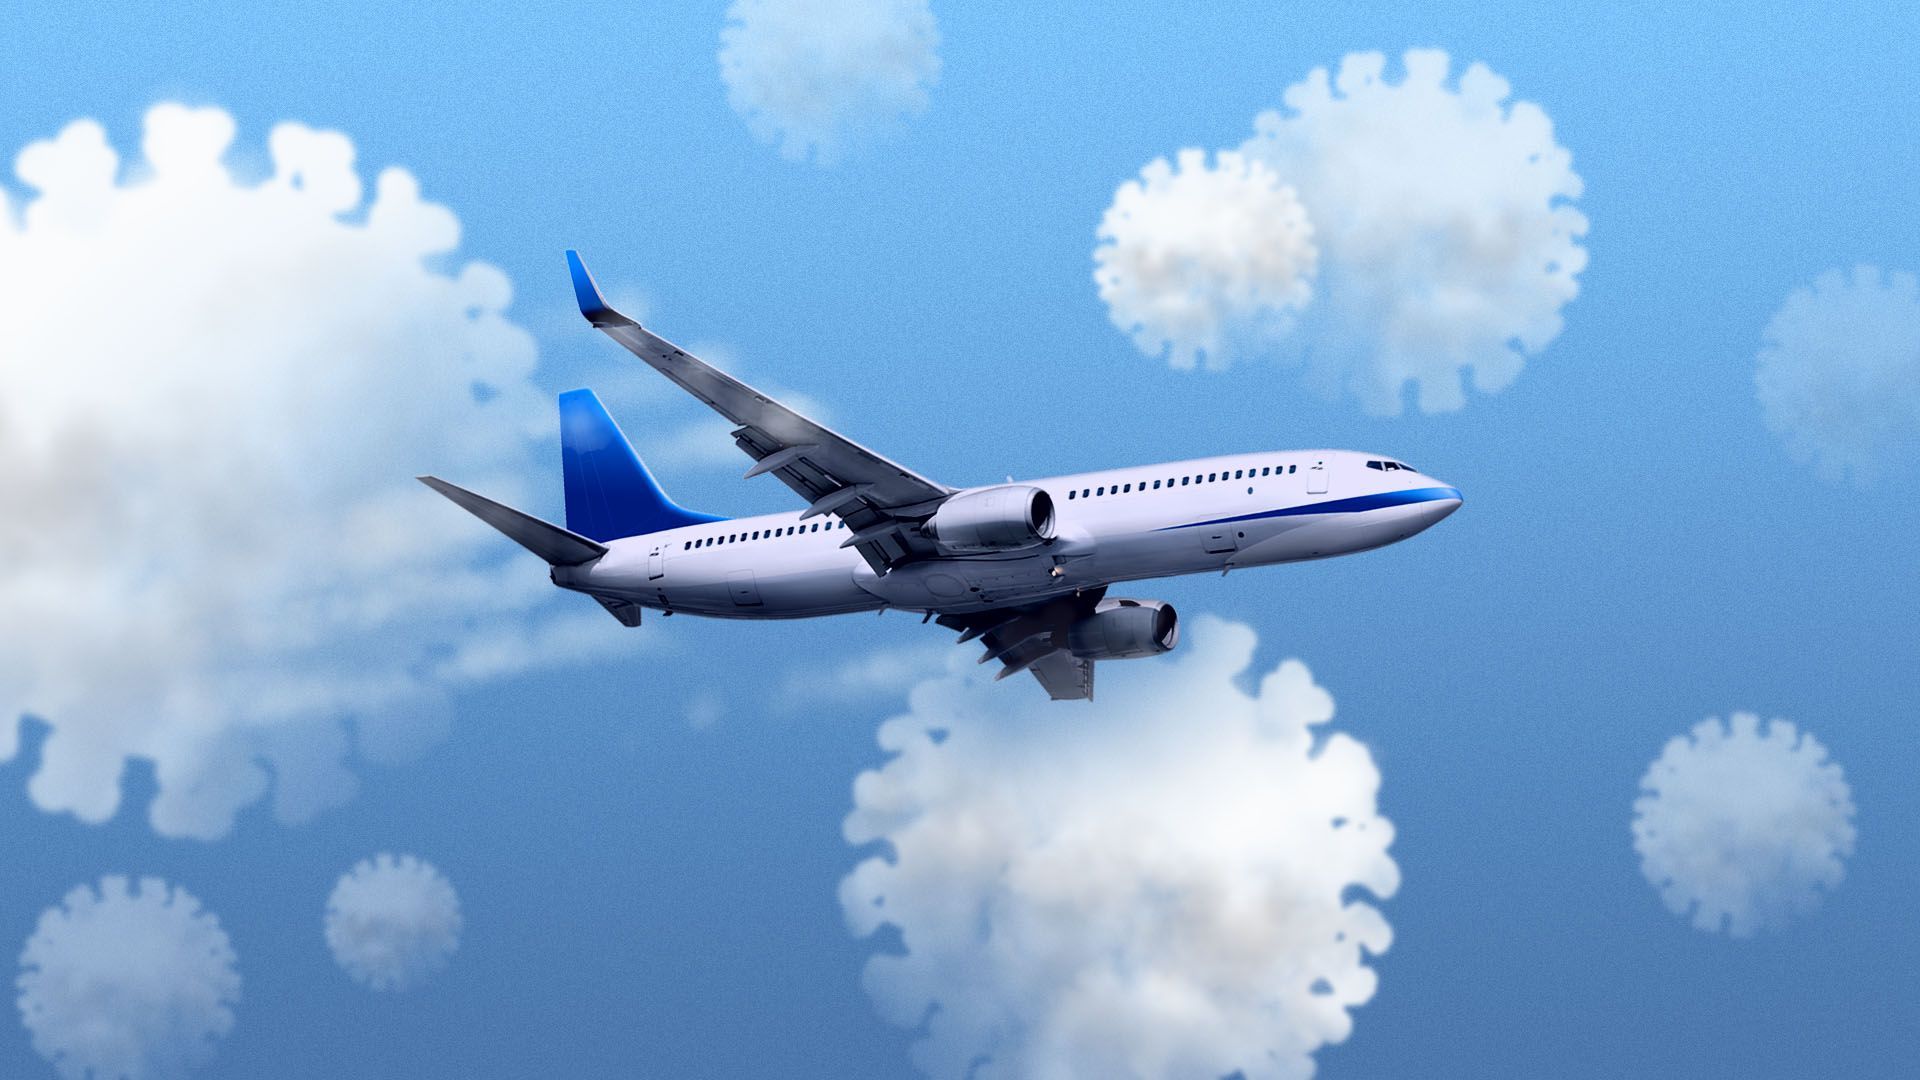 Illustration of a plane flying through clouds shaped like viruses